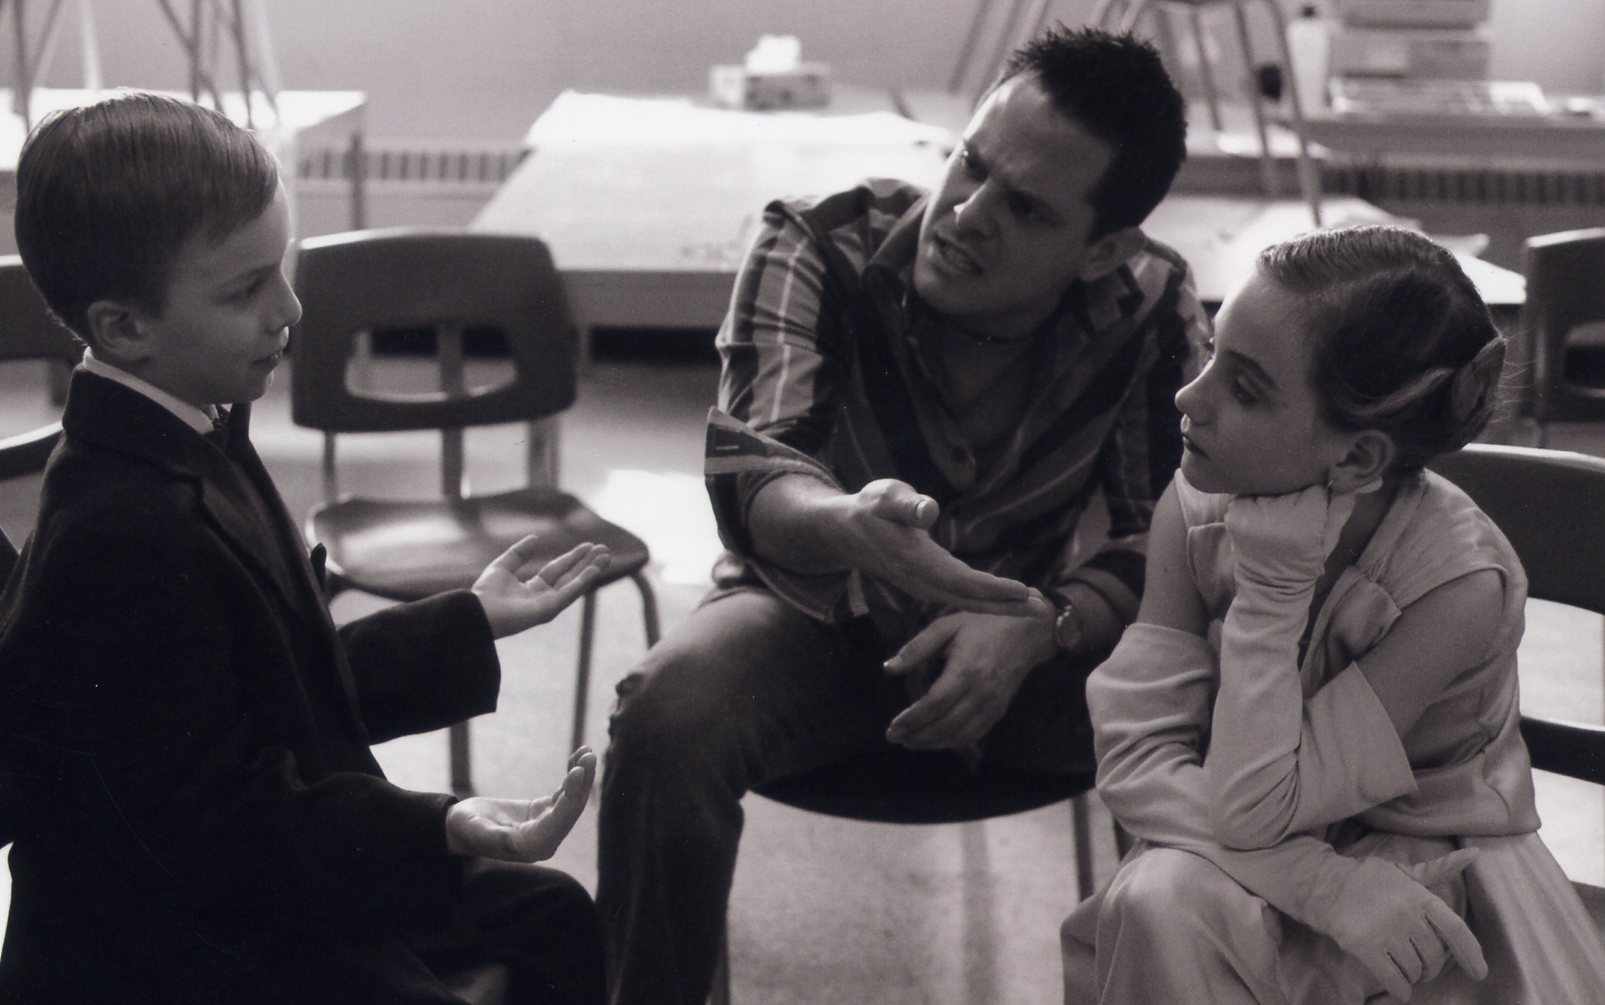 Director David Boisclair rehearsing a scene with Samuel Aubé (actor) and Catherine Pelletier (actress) for LADIES AND GENTLEMEN (2005).